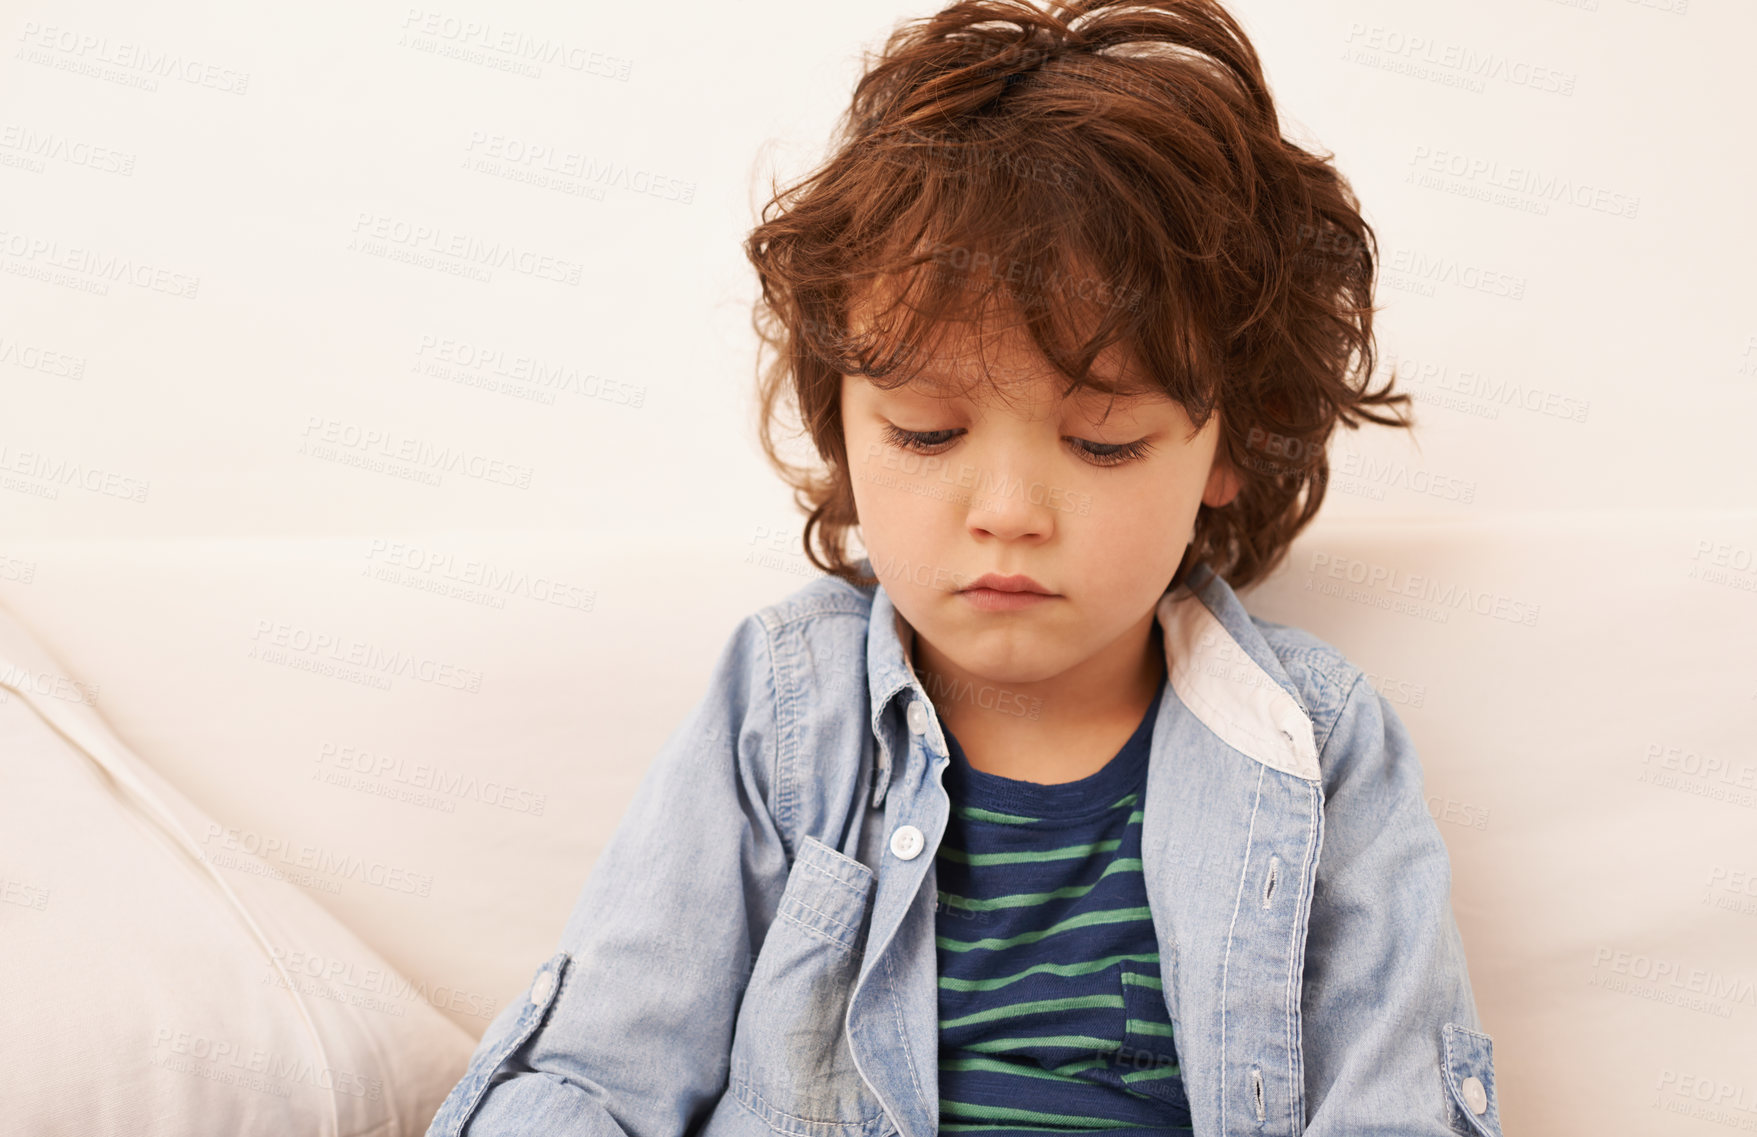 Buy stock photo Shot of an unhappy-looking little boy sitting indoors